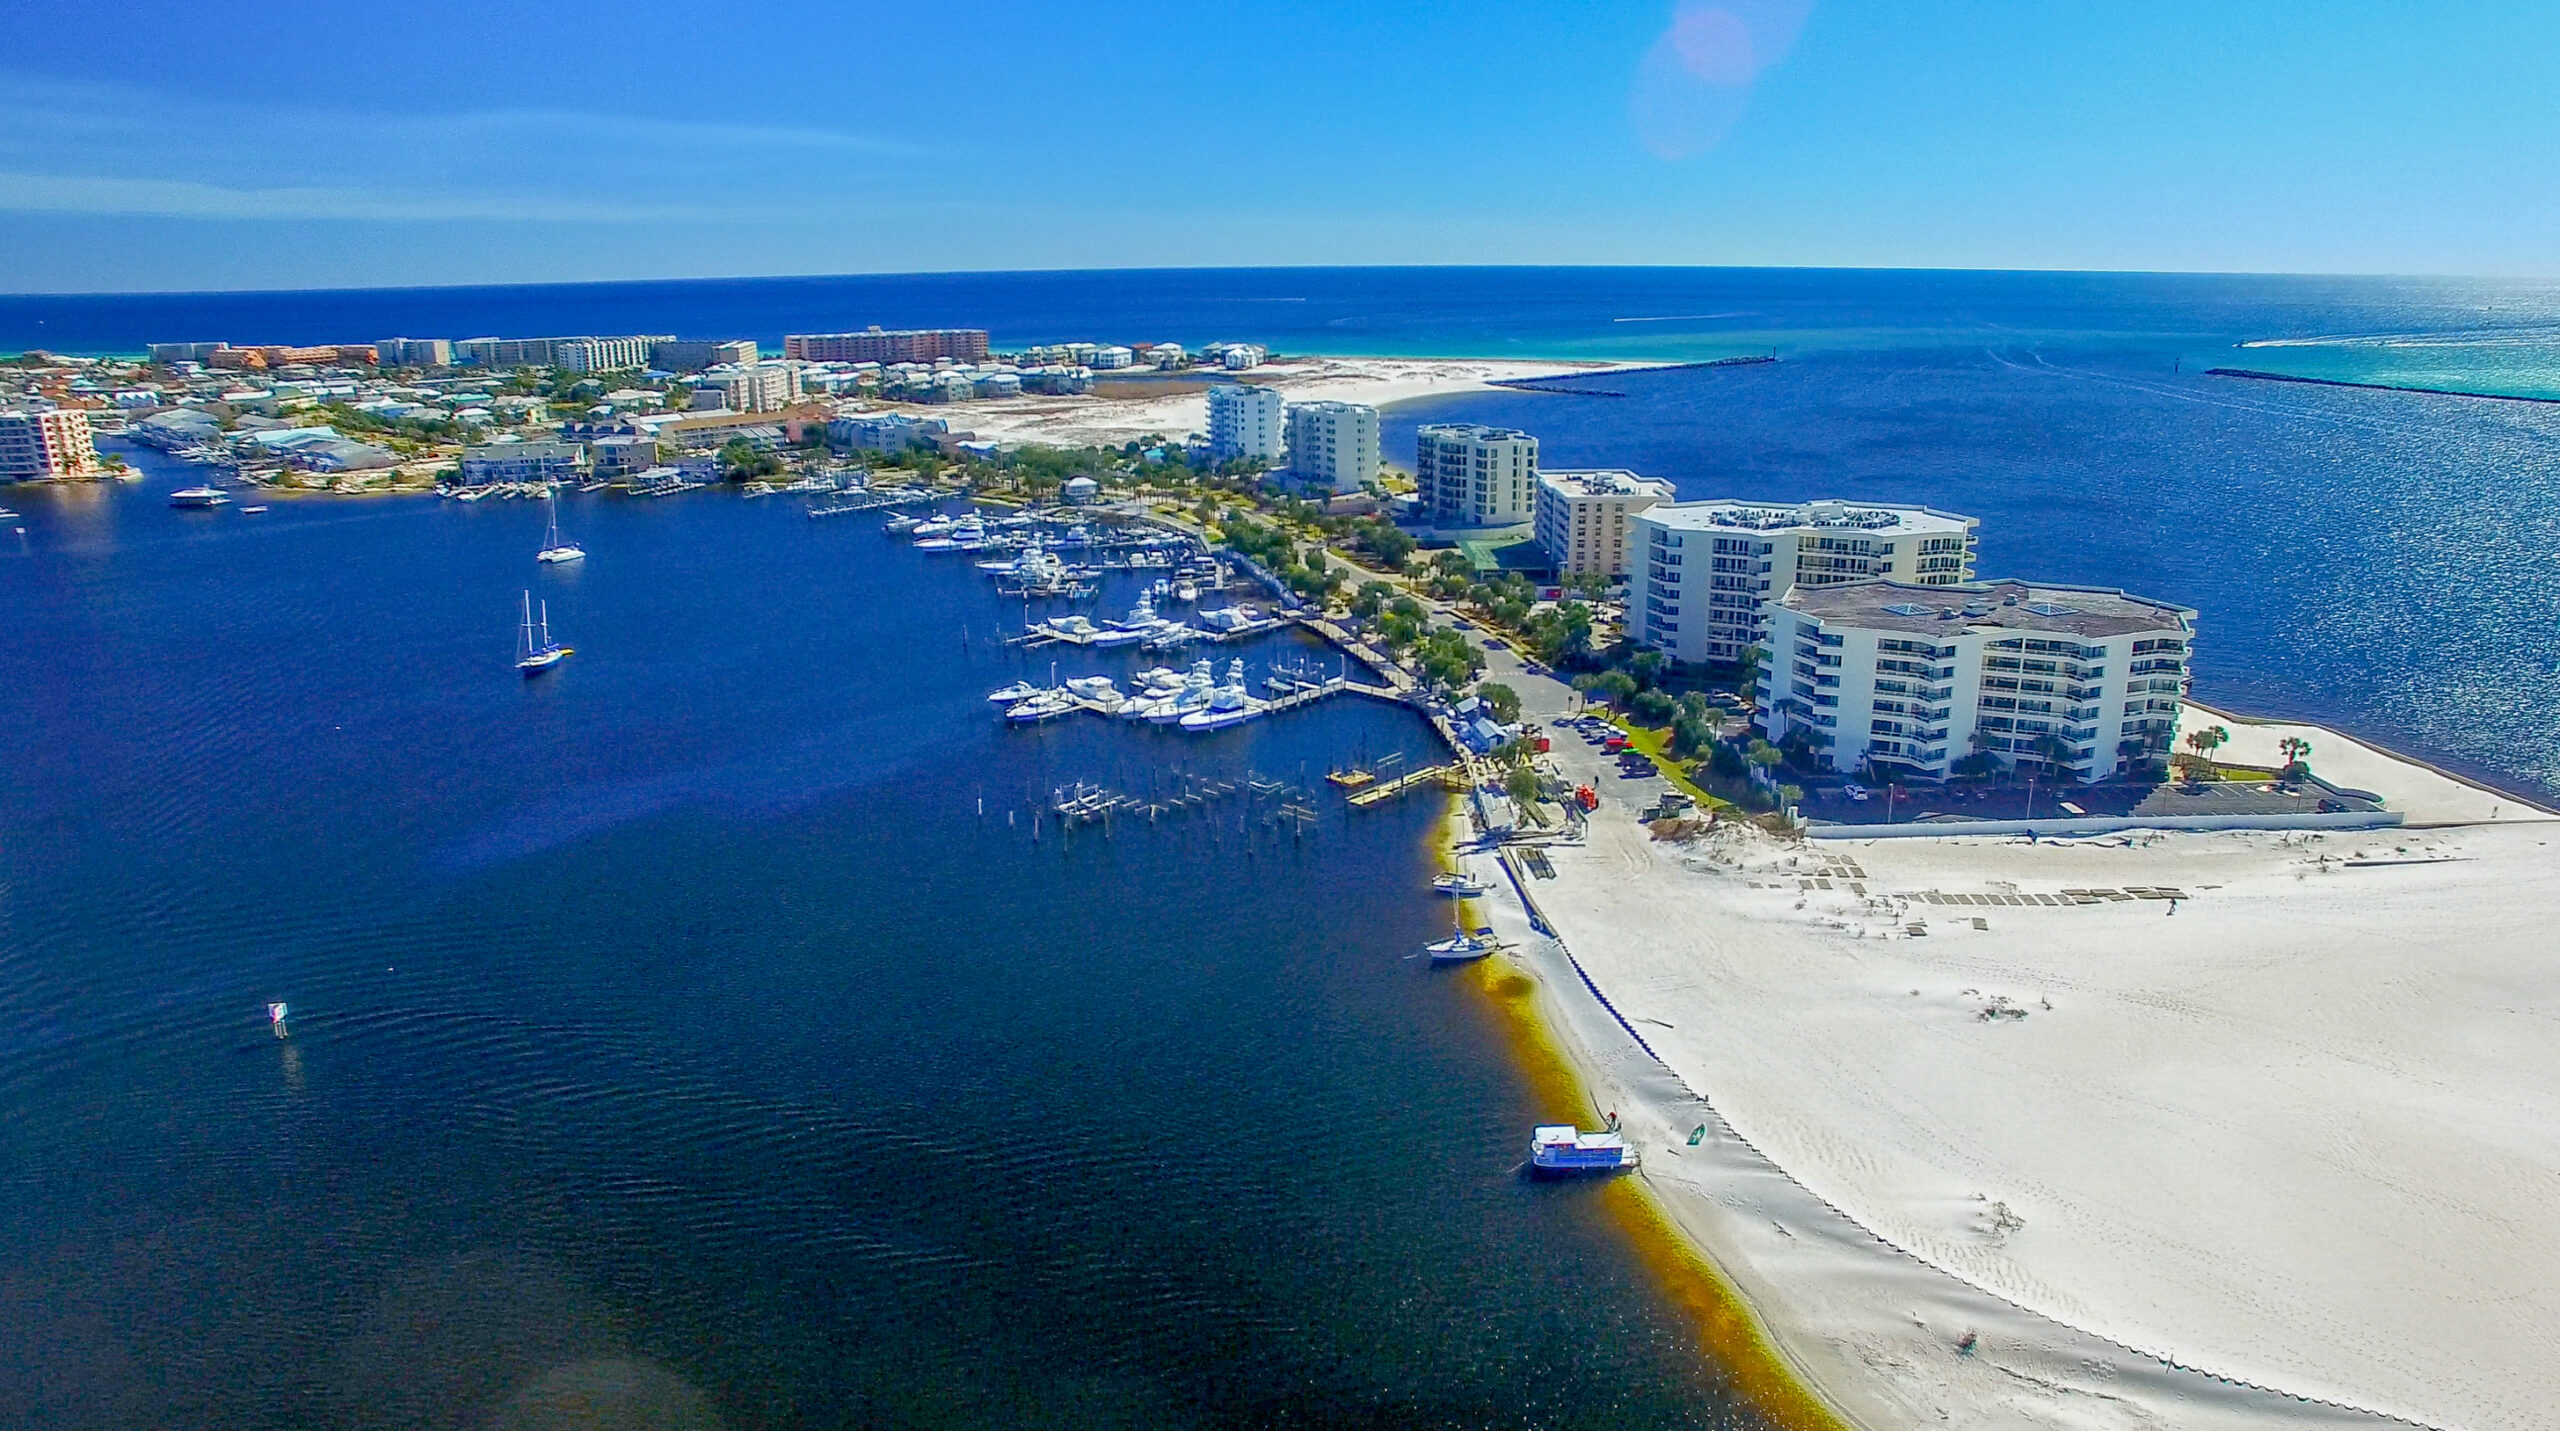 10 Pros and Cons of living in Destin, FL